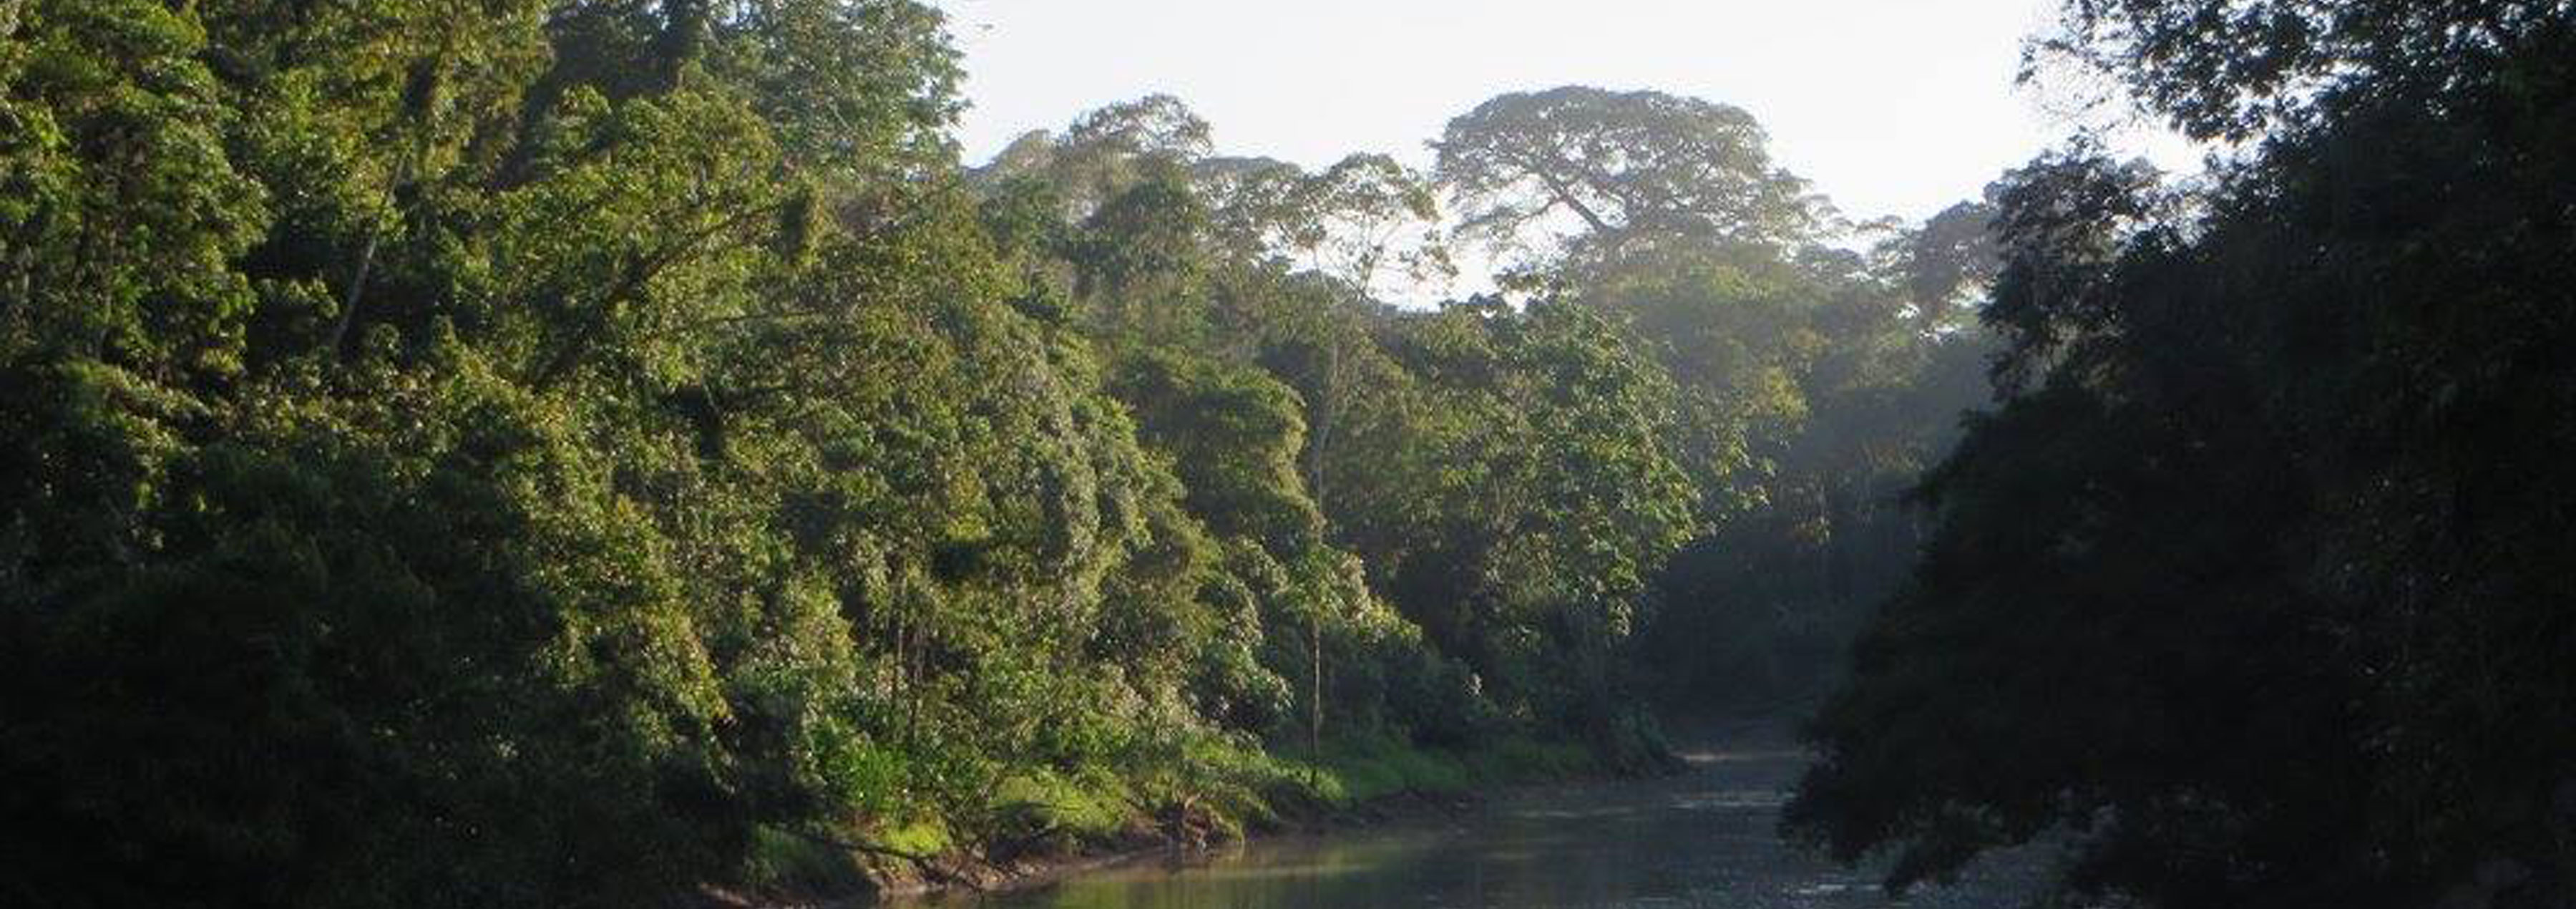 Amazon rainforest with river 